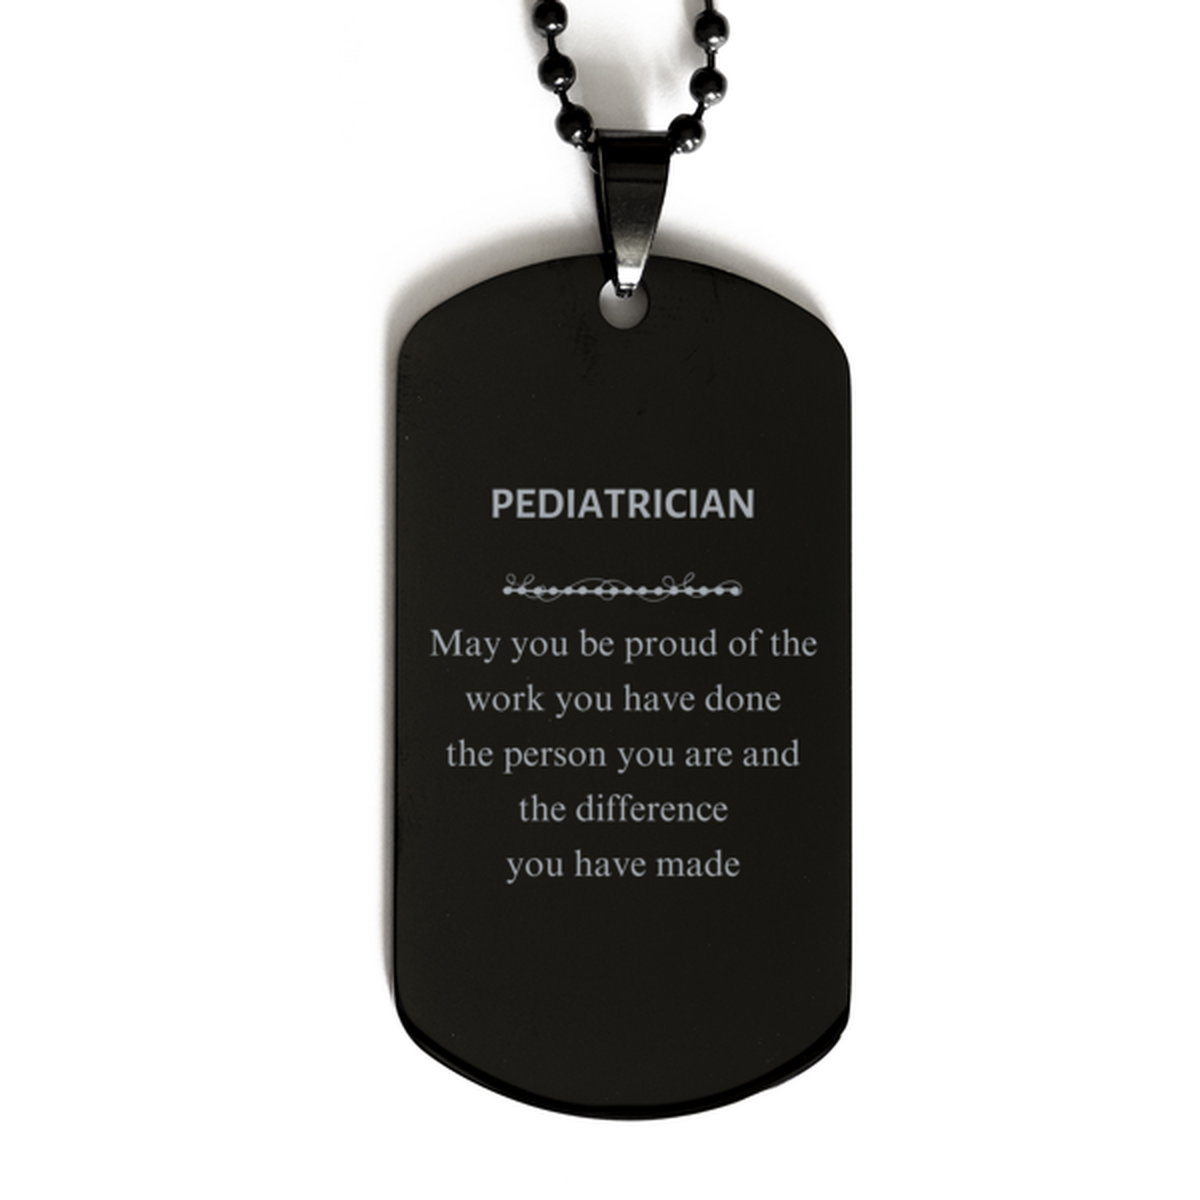 Pediatrician May you be proud of the work you have done, Retirement Pediatrician Black Dog Tag for Colleague Appreciation Gifts Amazing for Pediatrician